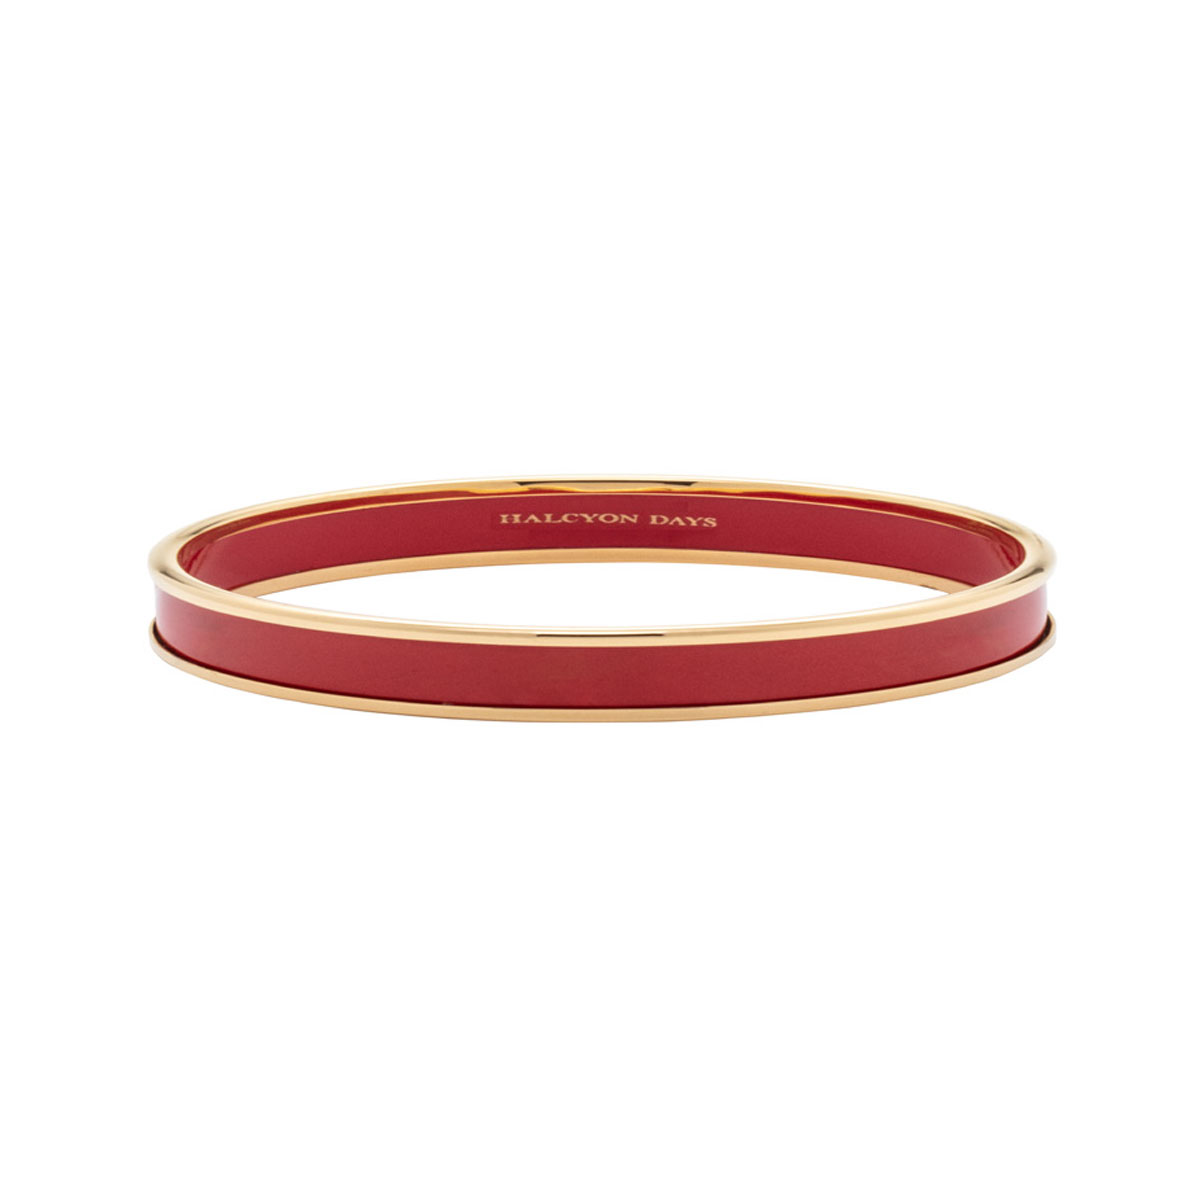 Halcyon Days 6mm Red Gold Small Bangle